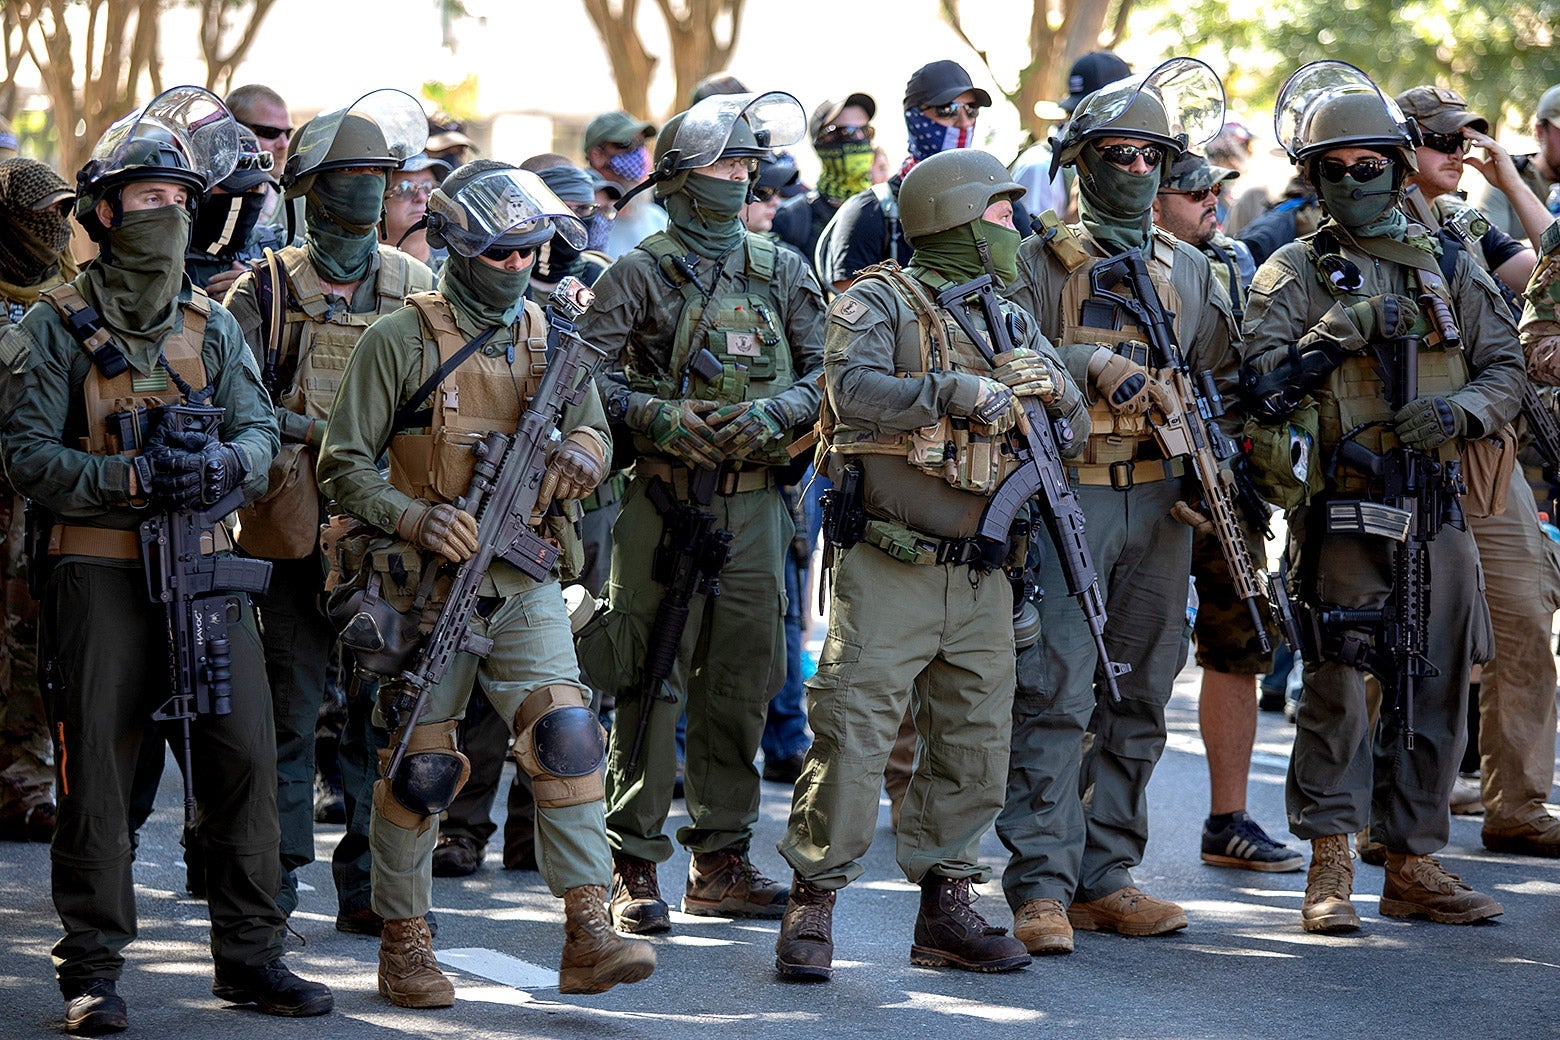 A group of men in camouflage tactical gear carry large rifles.